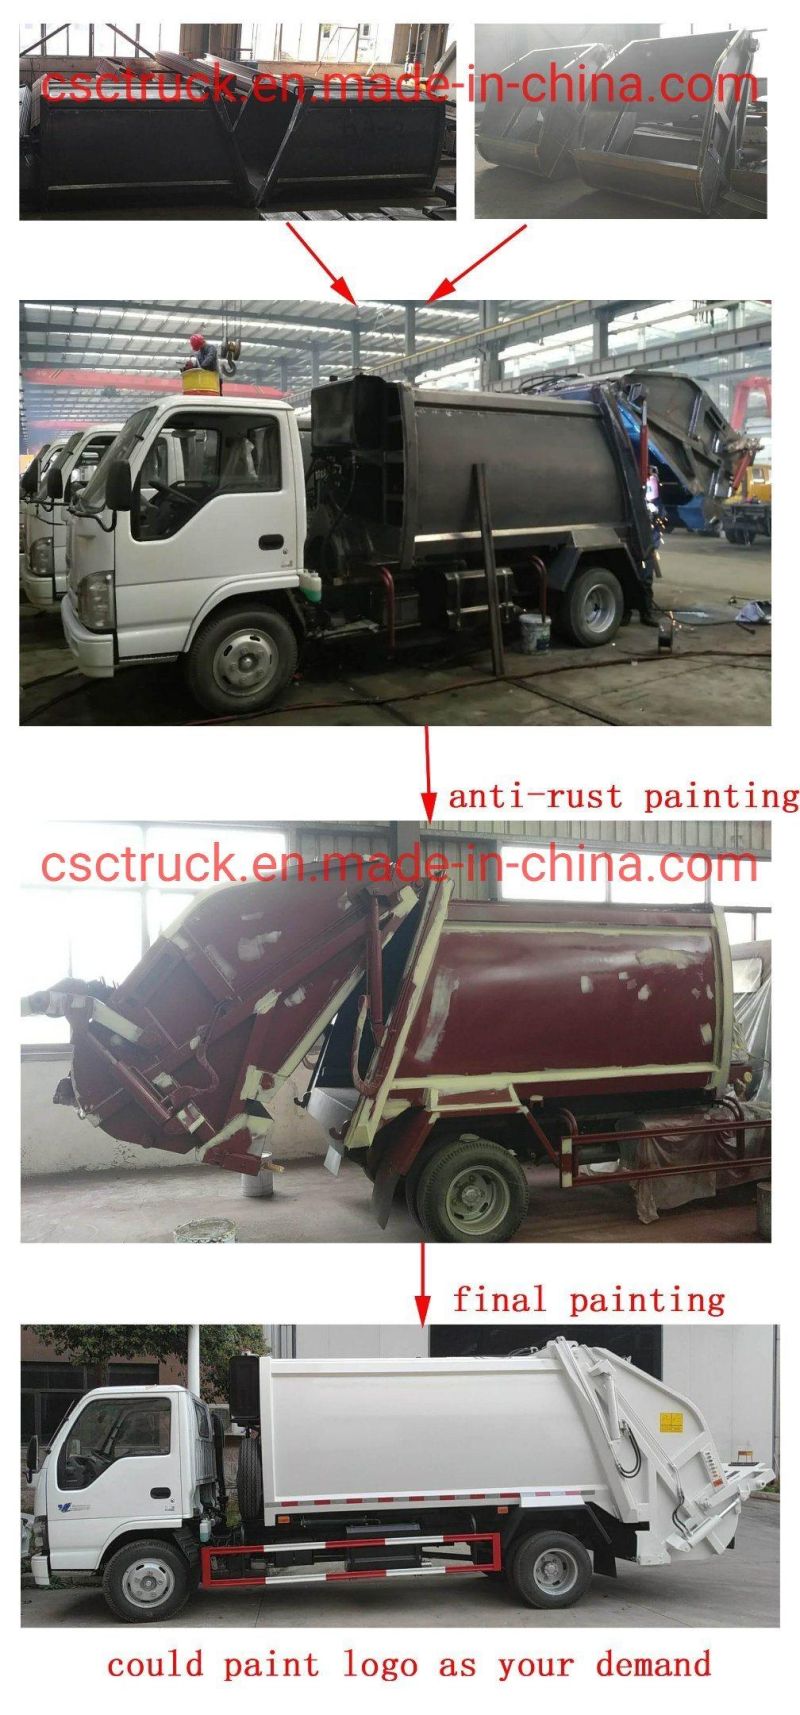 12cbm 14cbm Dongfeng 8tons 10tons 4X2 Compactor Garbage Truck